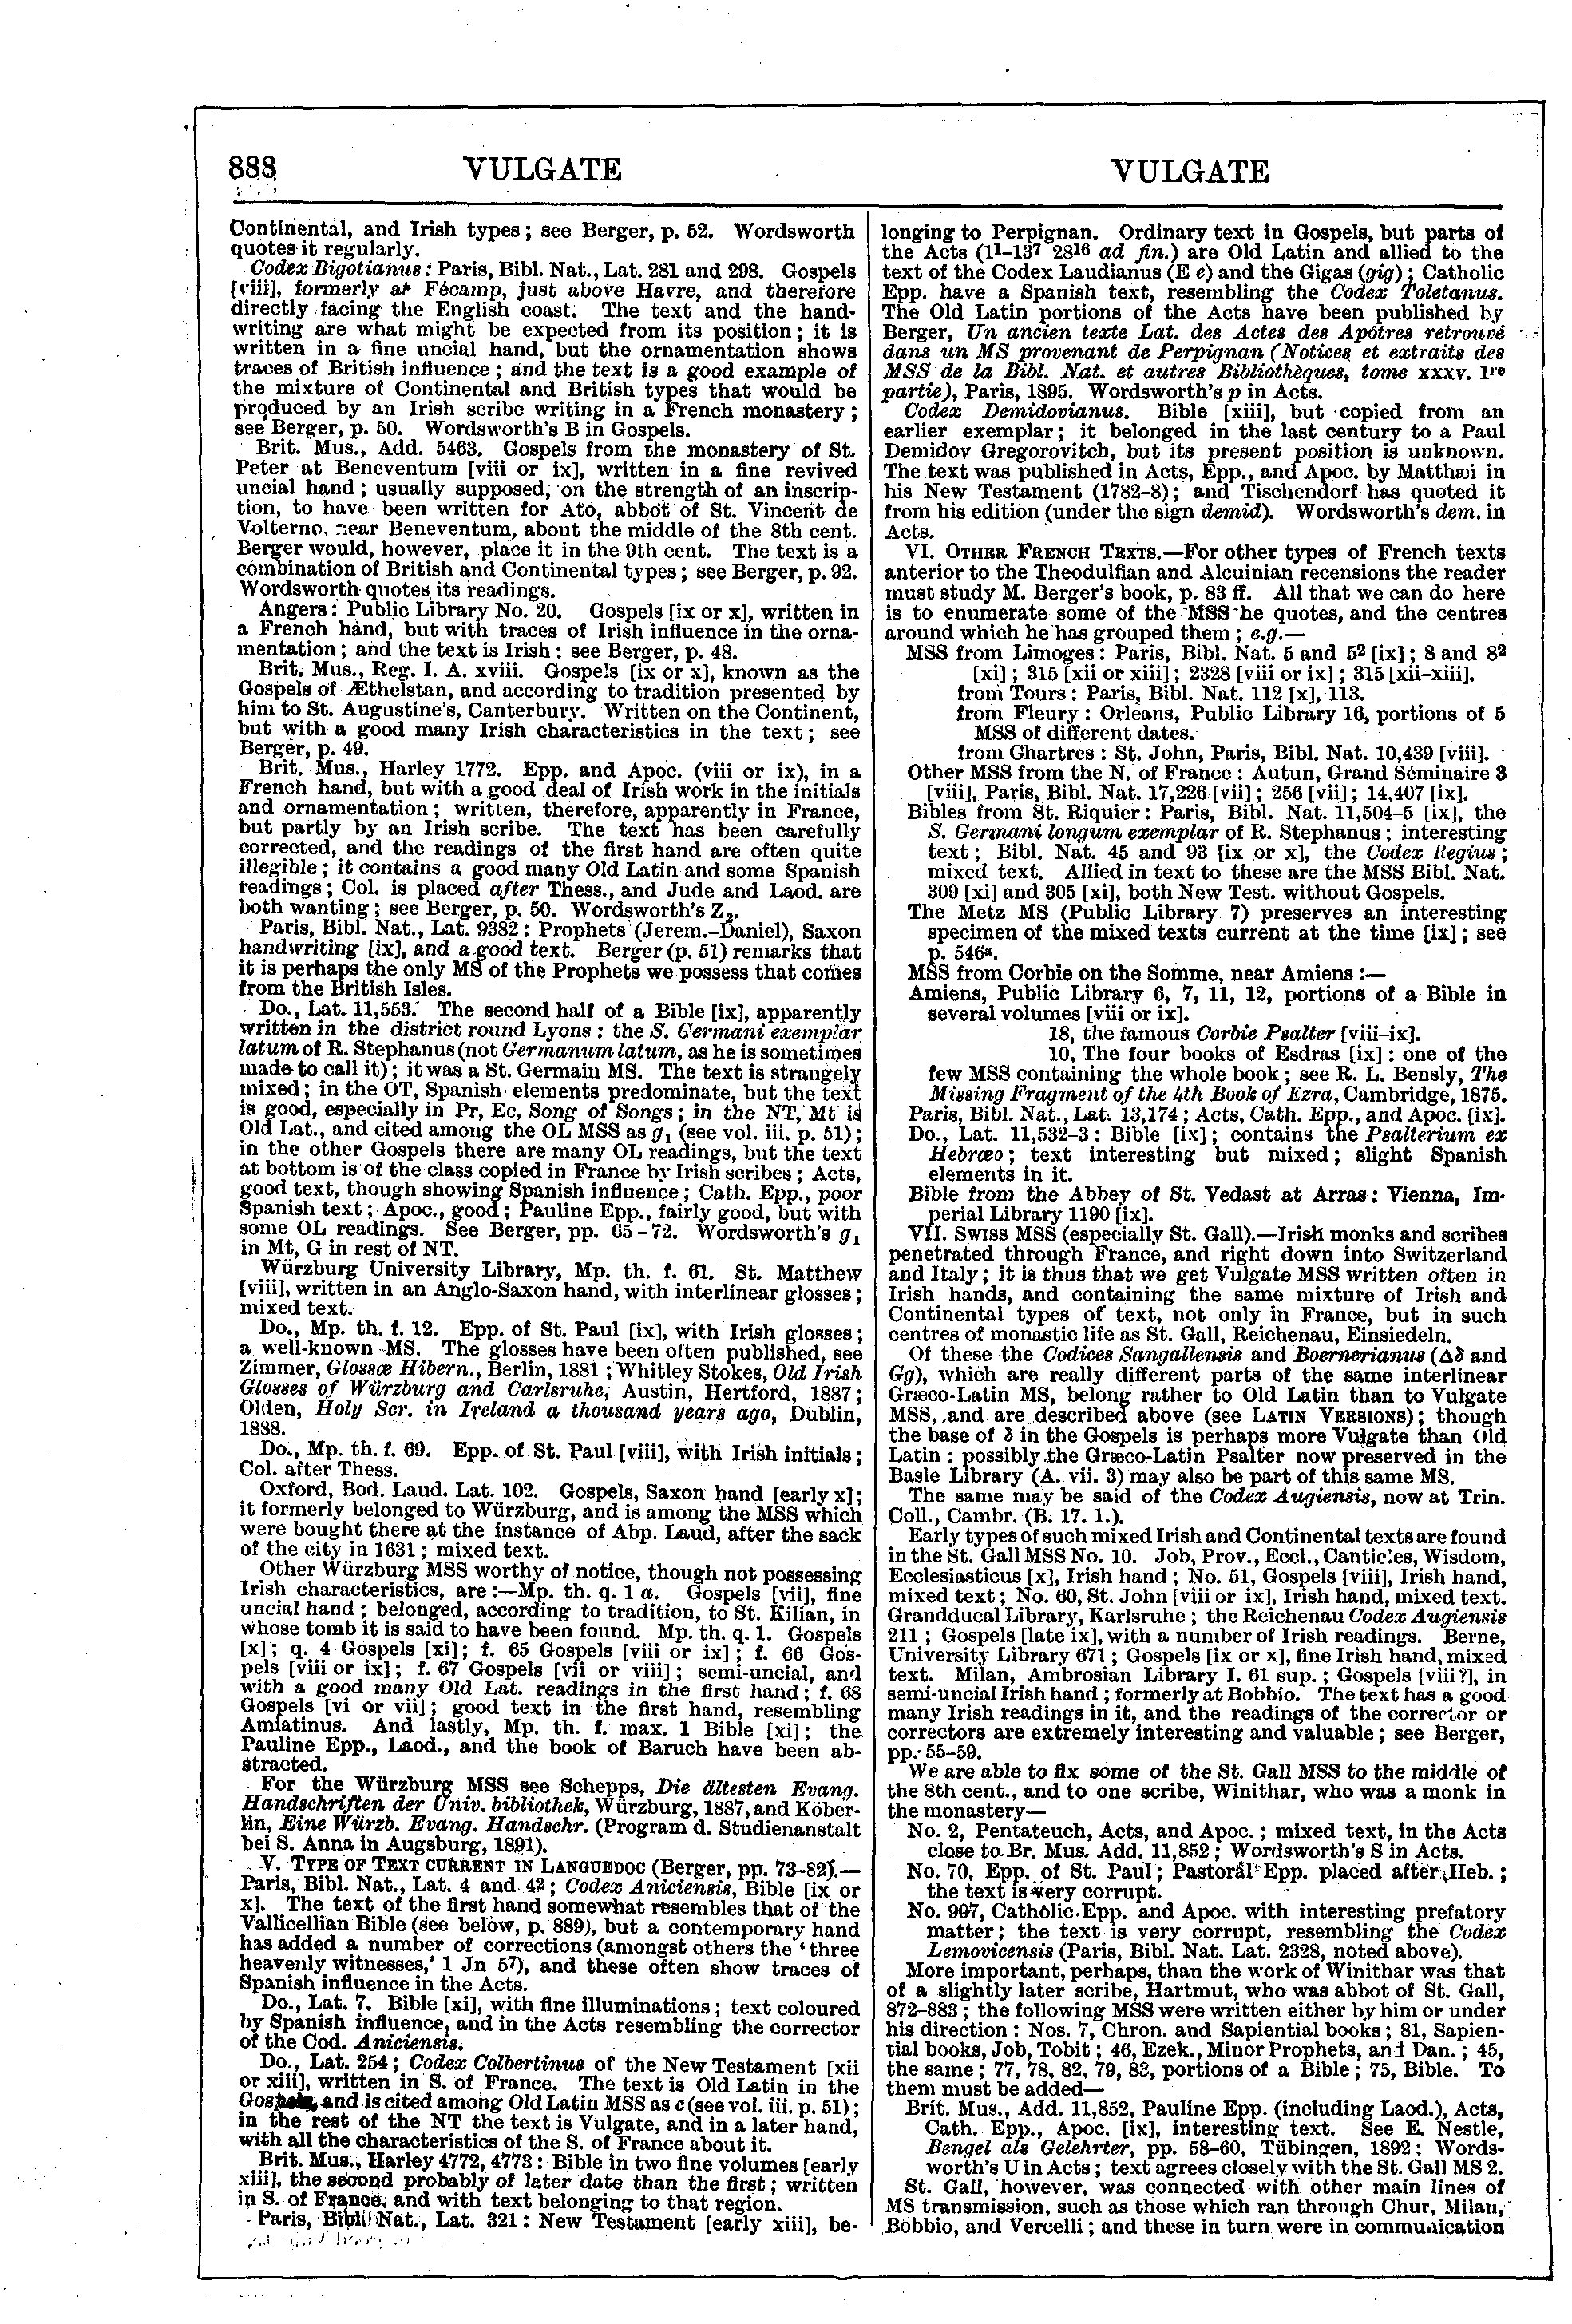 Image of page 888